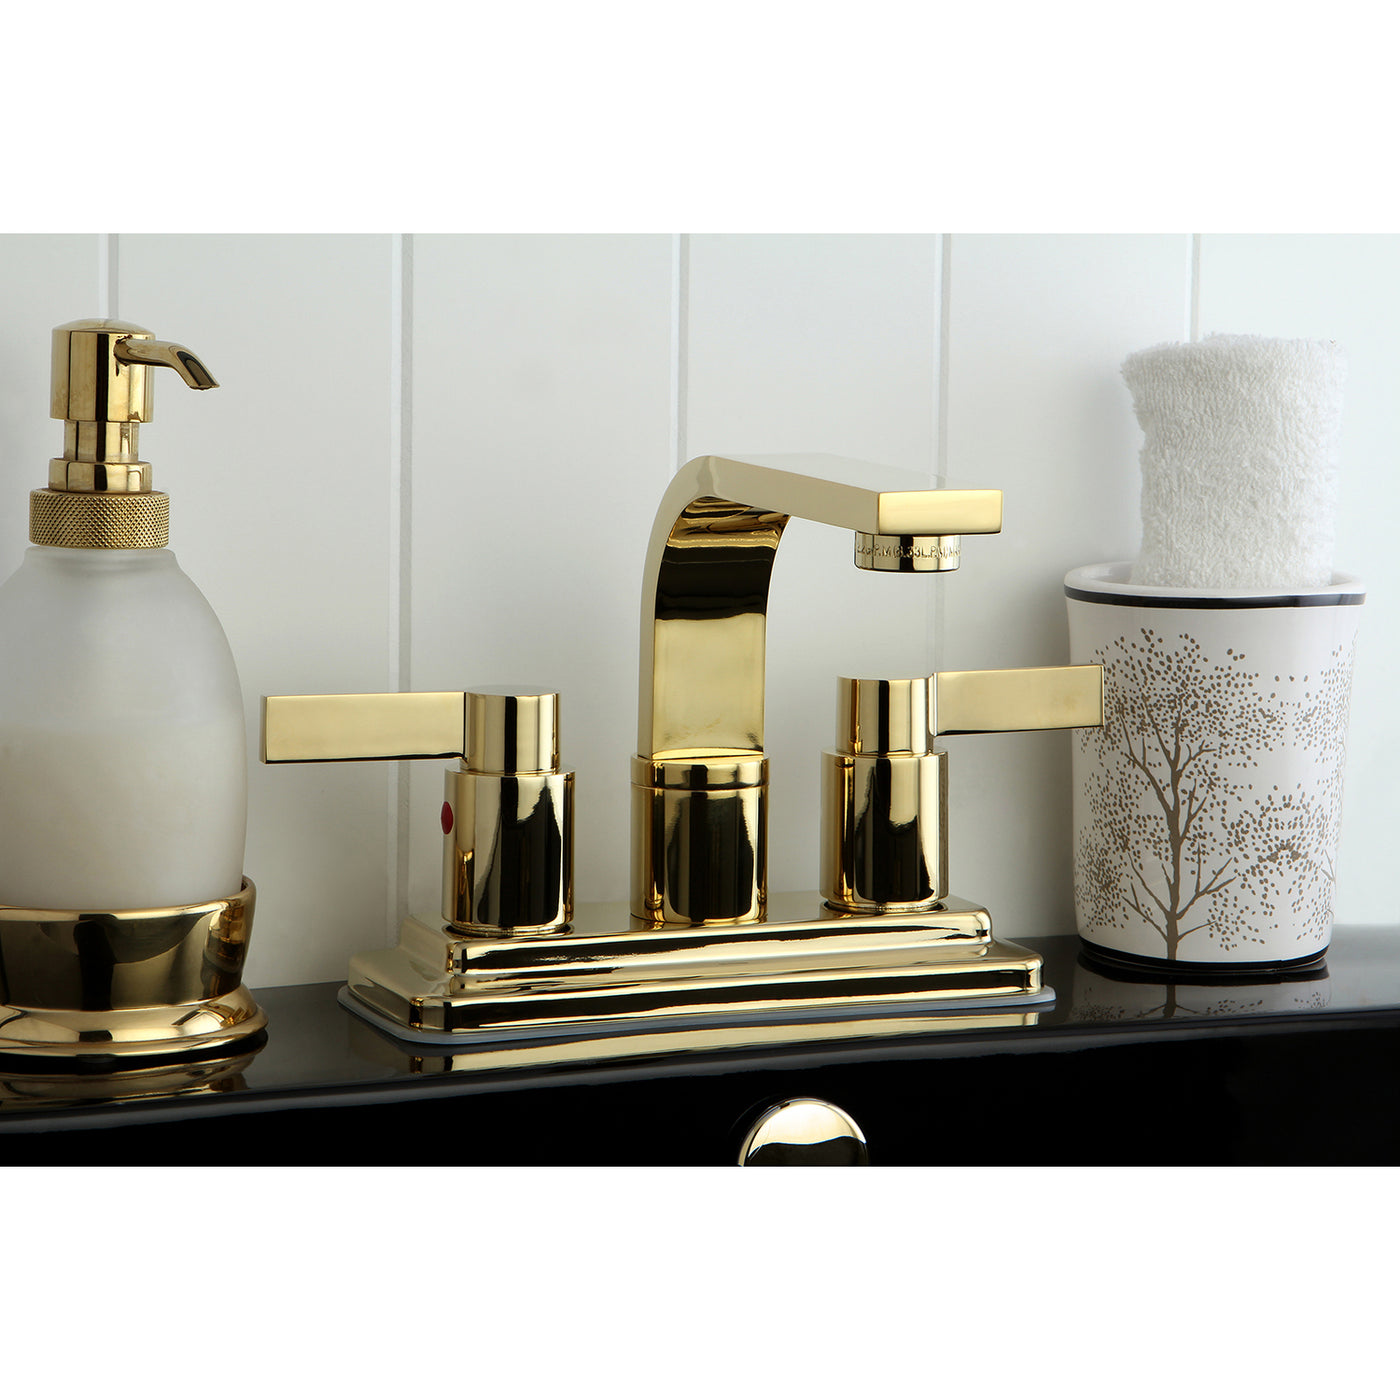 Elements of Design EB8462NDL 4-Inch Centerset Bathroom Faucet with Push Pop-Up, Polished Brass